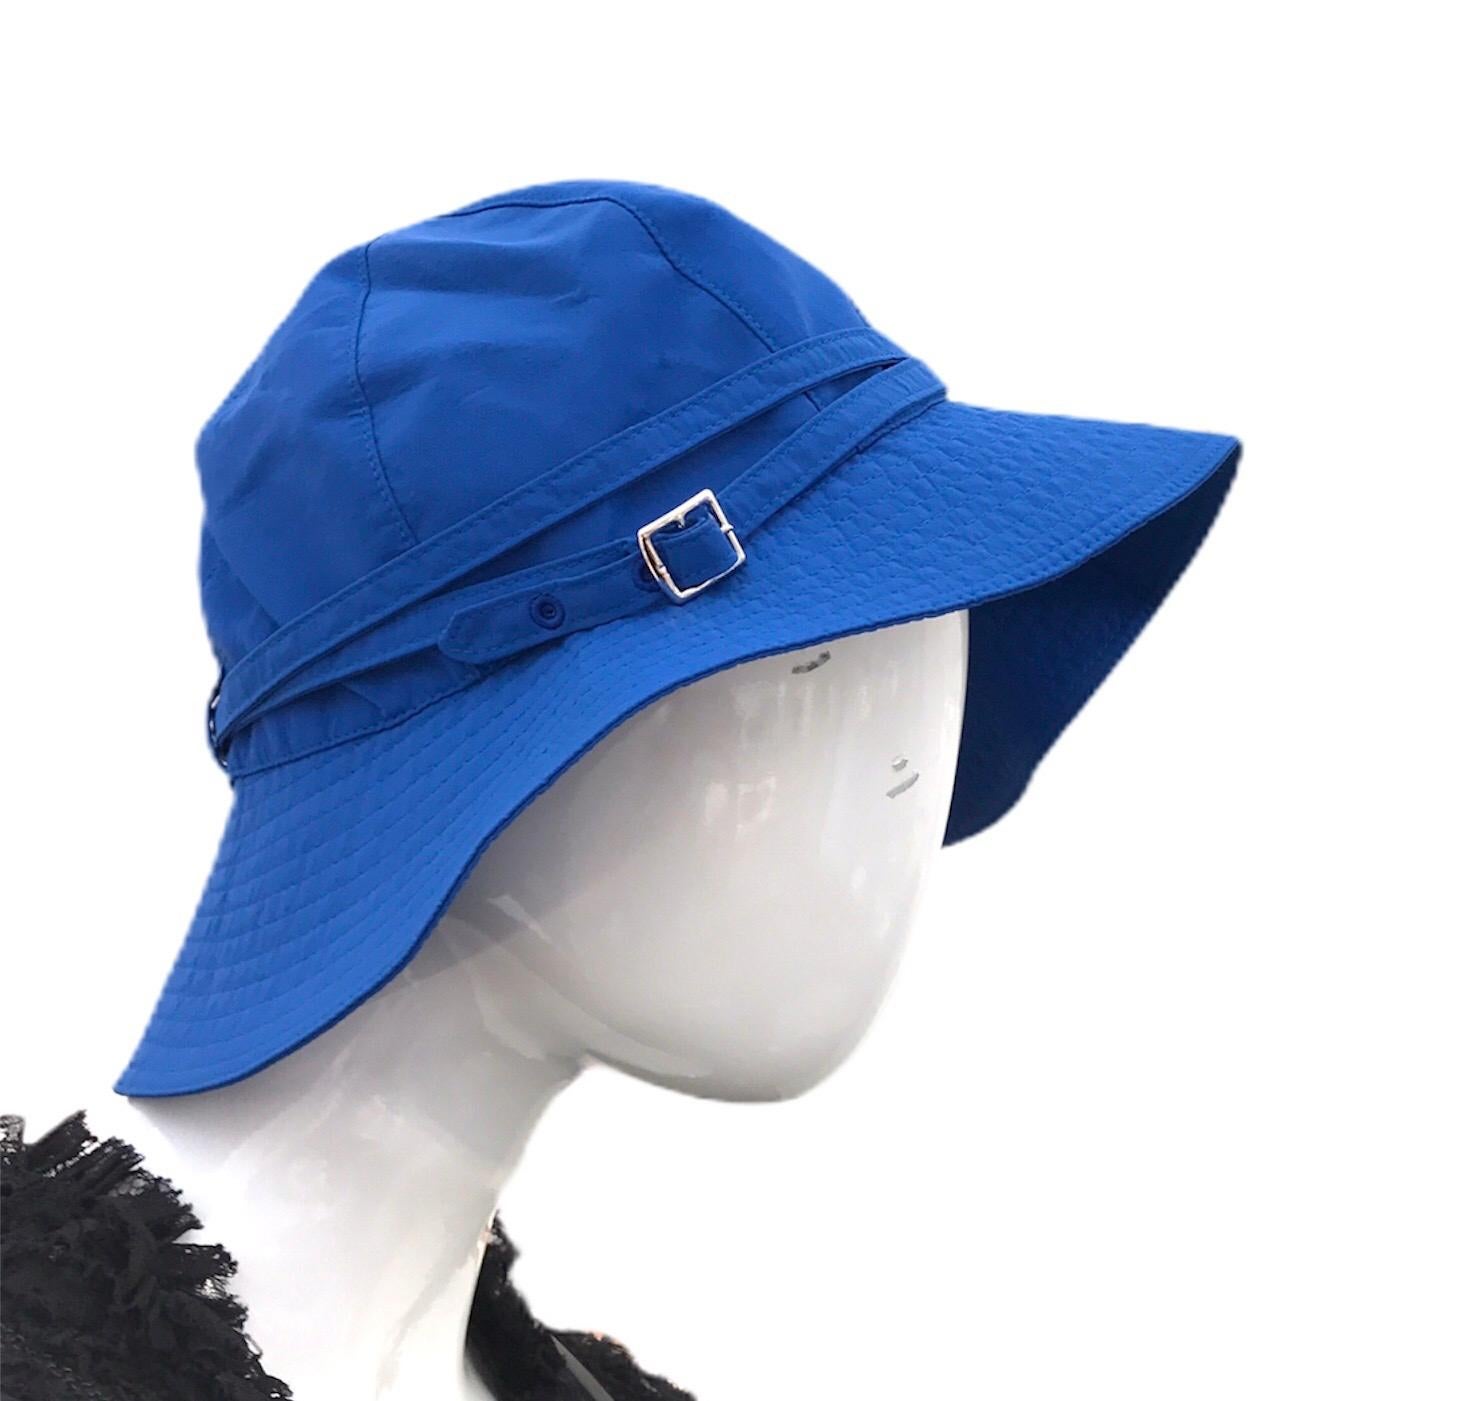 HERMES hat in electric blue fabric, excellent condition, size 56 in cotton
Silver metal accessory.
Interior in black fabric.